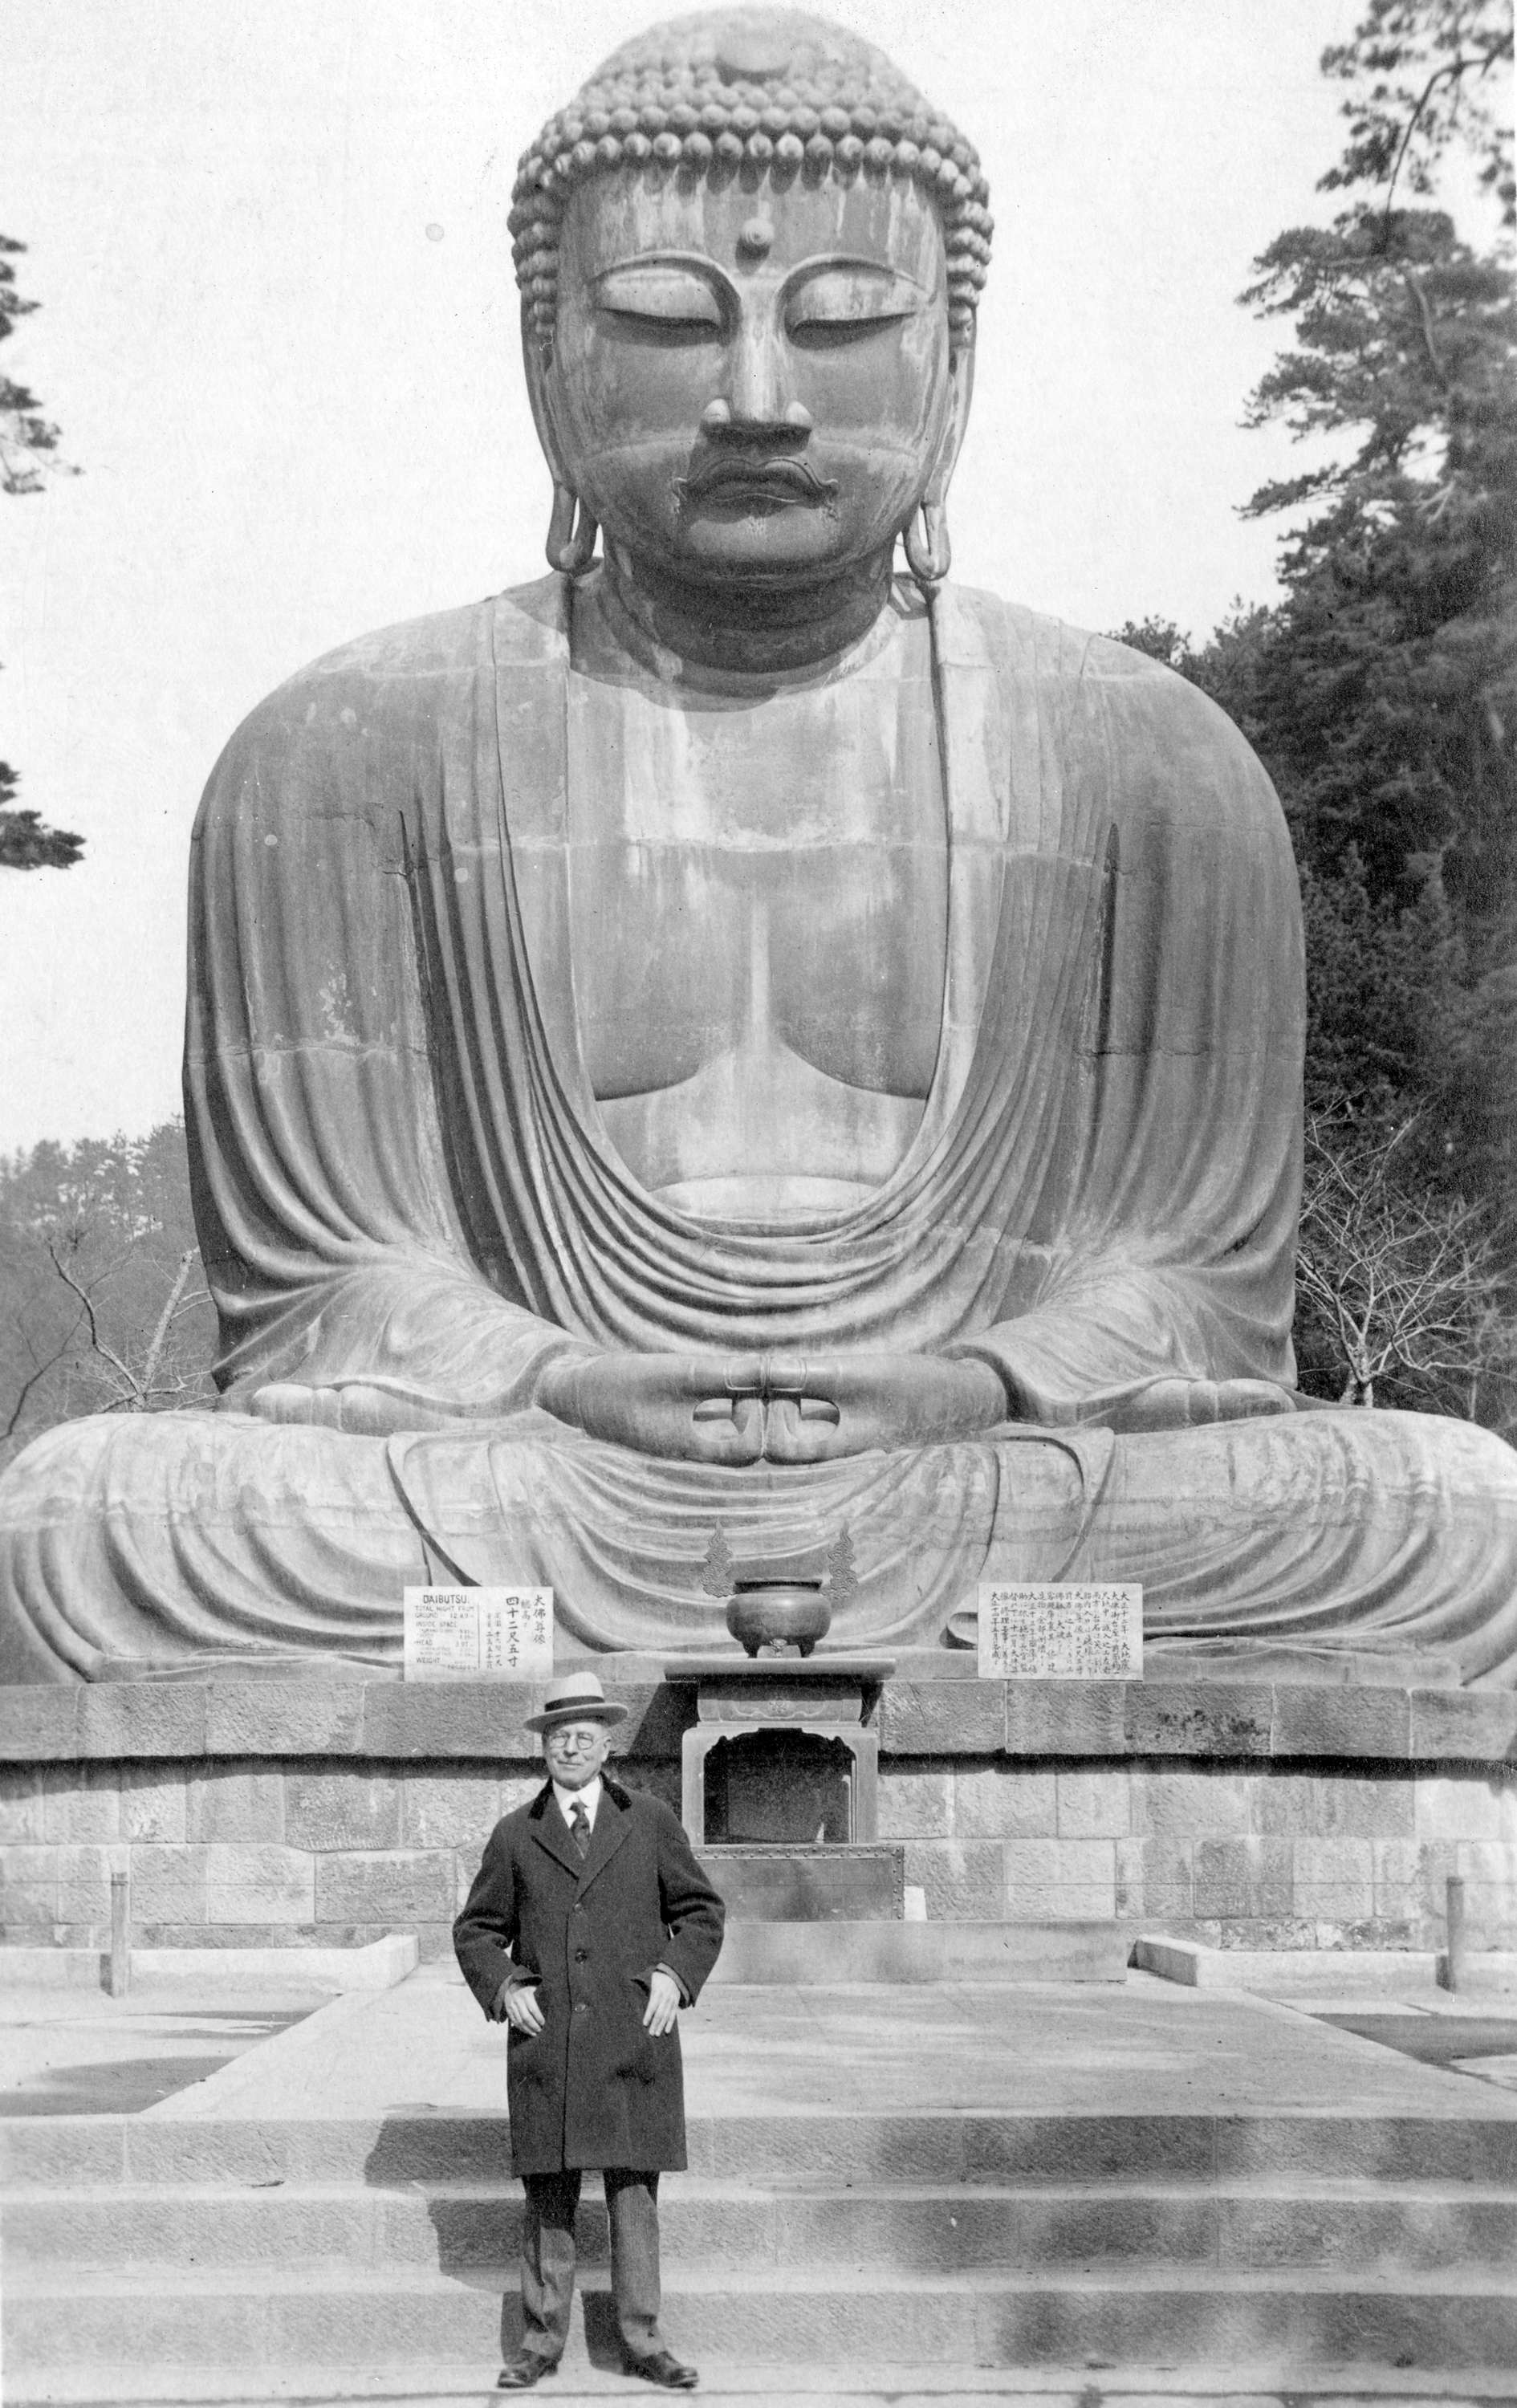 L.D. Taylor standing in front of a buddha statue in] Kamakura Japan ...